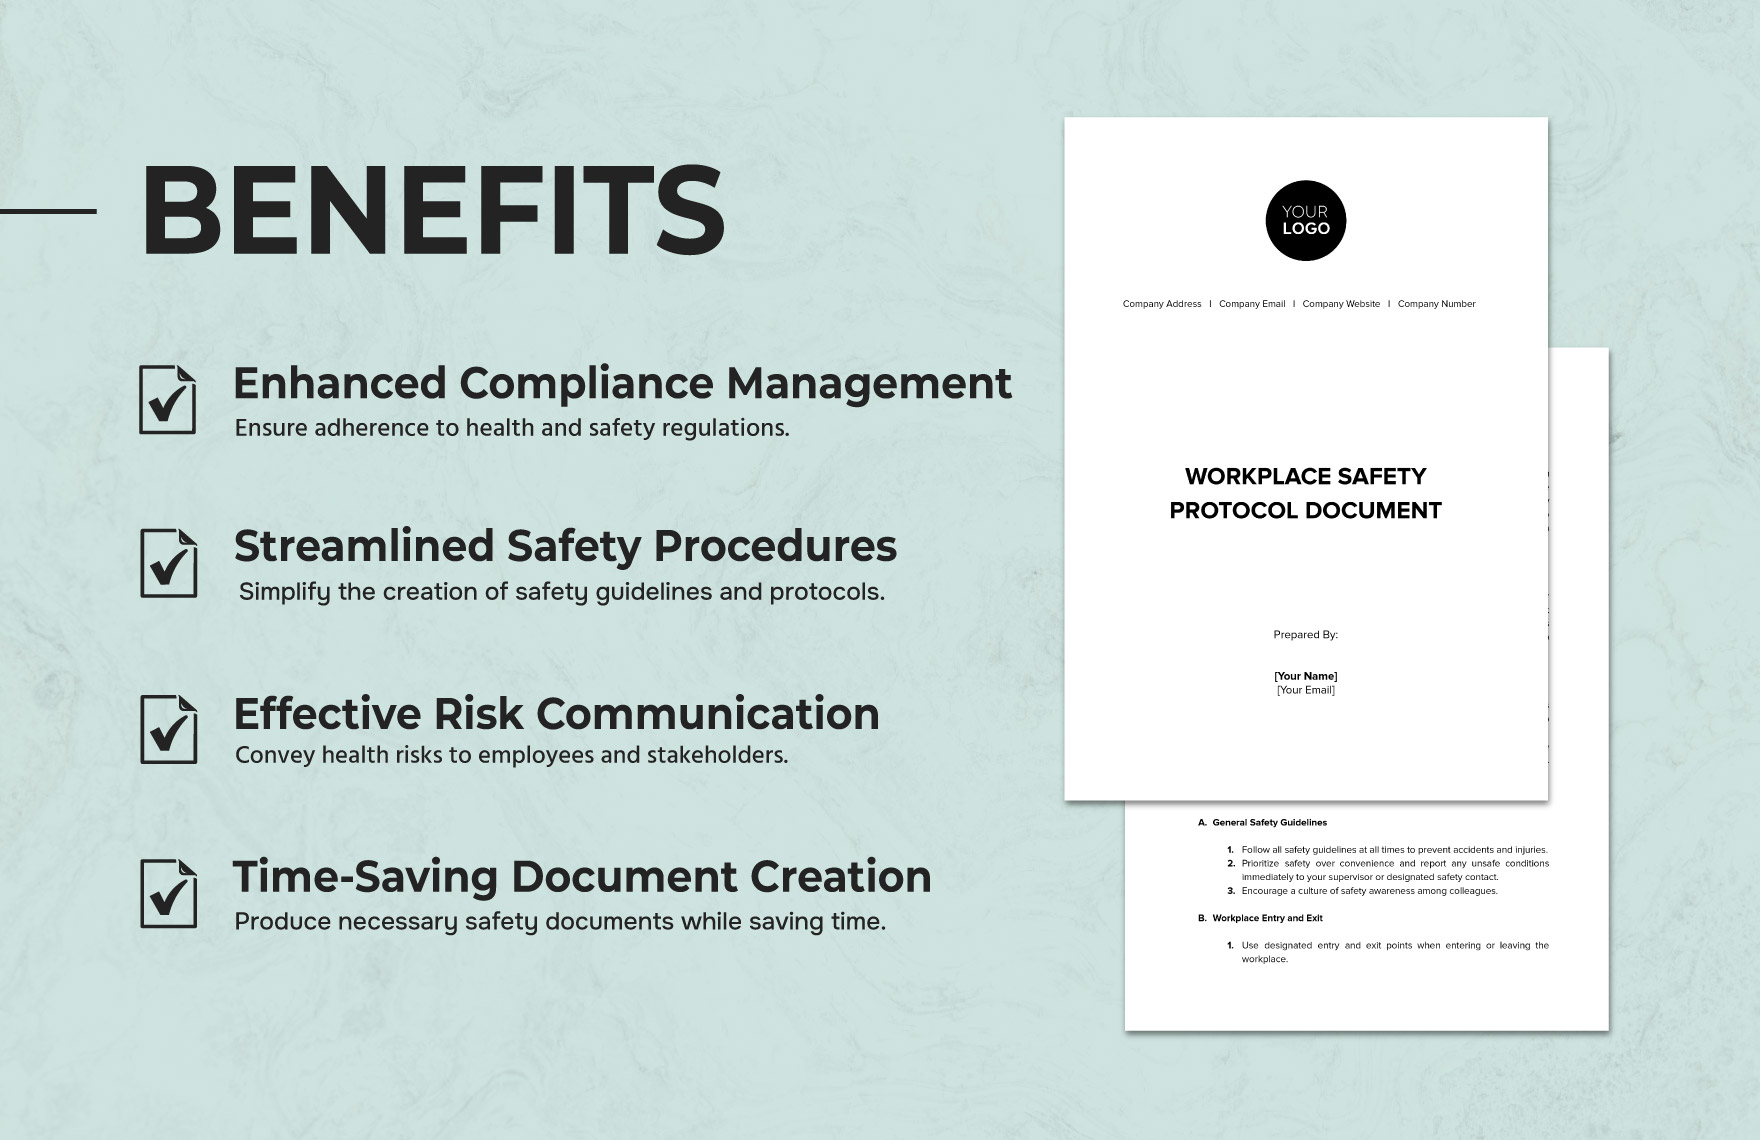 Workplace Safety Protocol Document Template